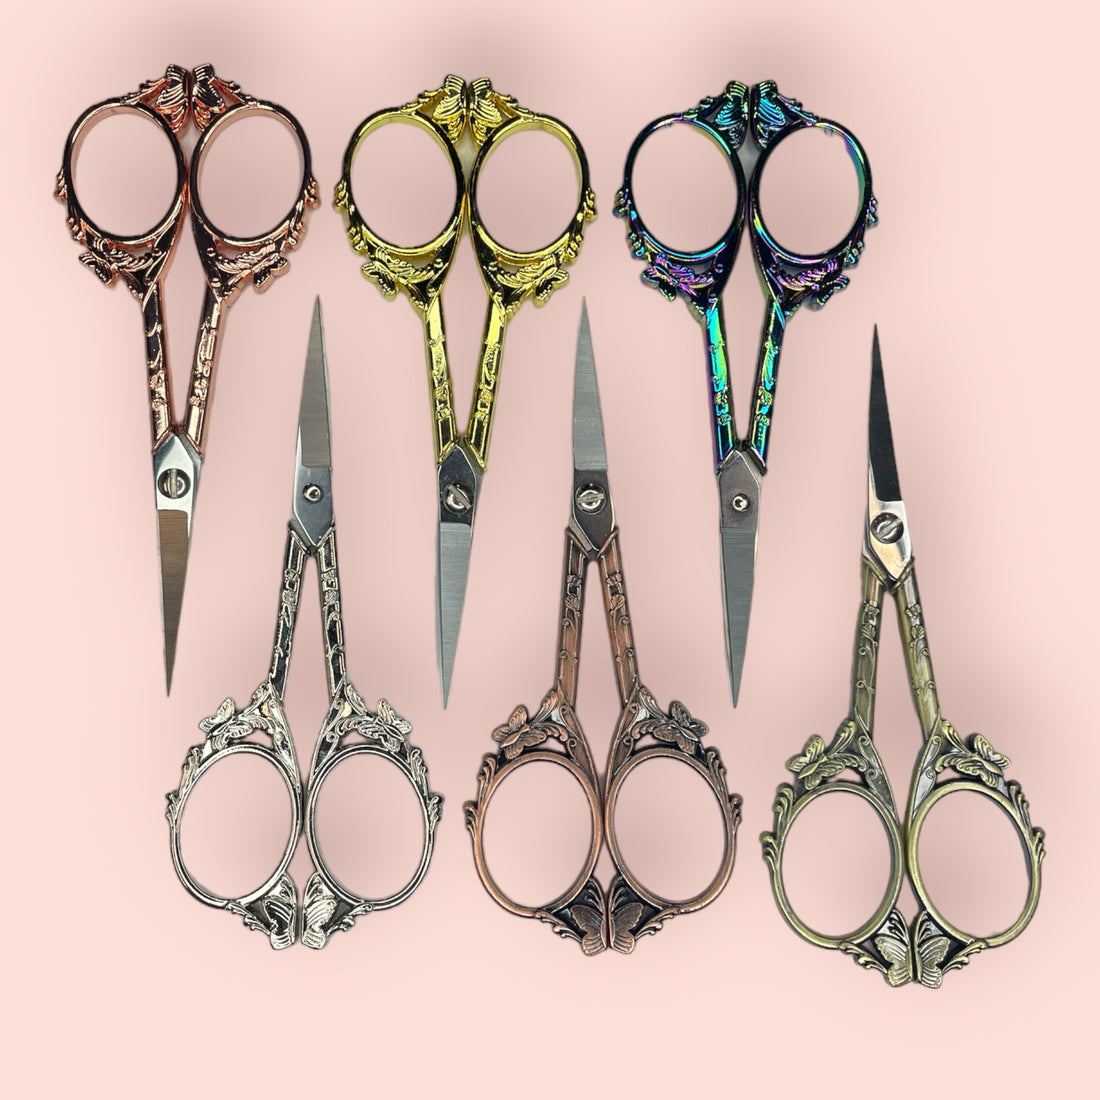 Embroidery Tip Scissors